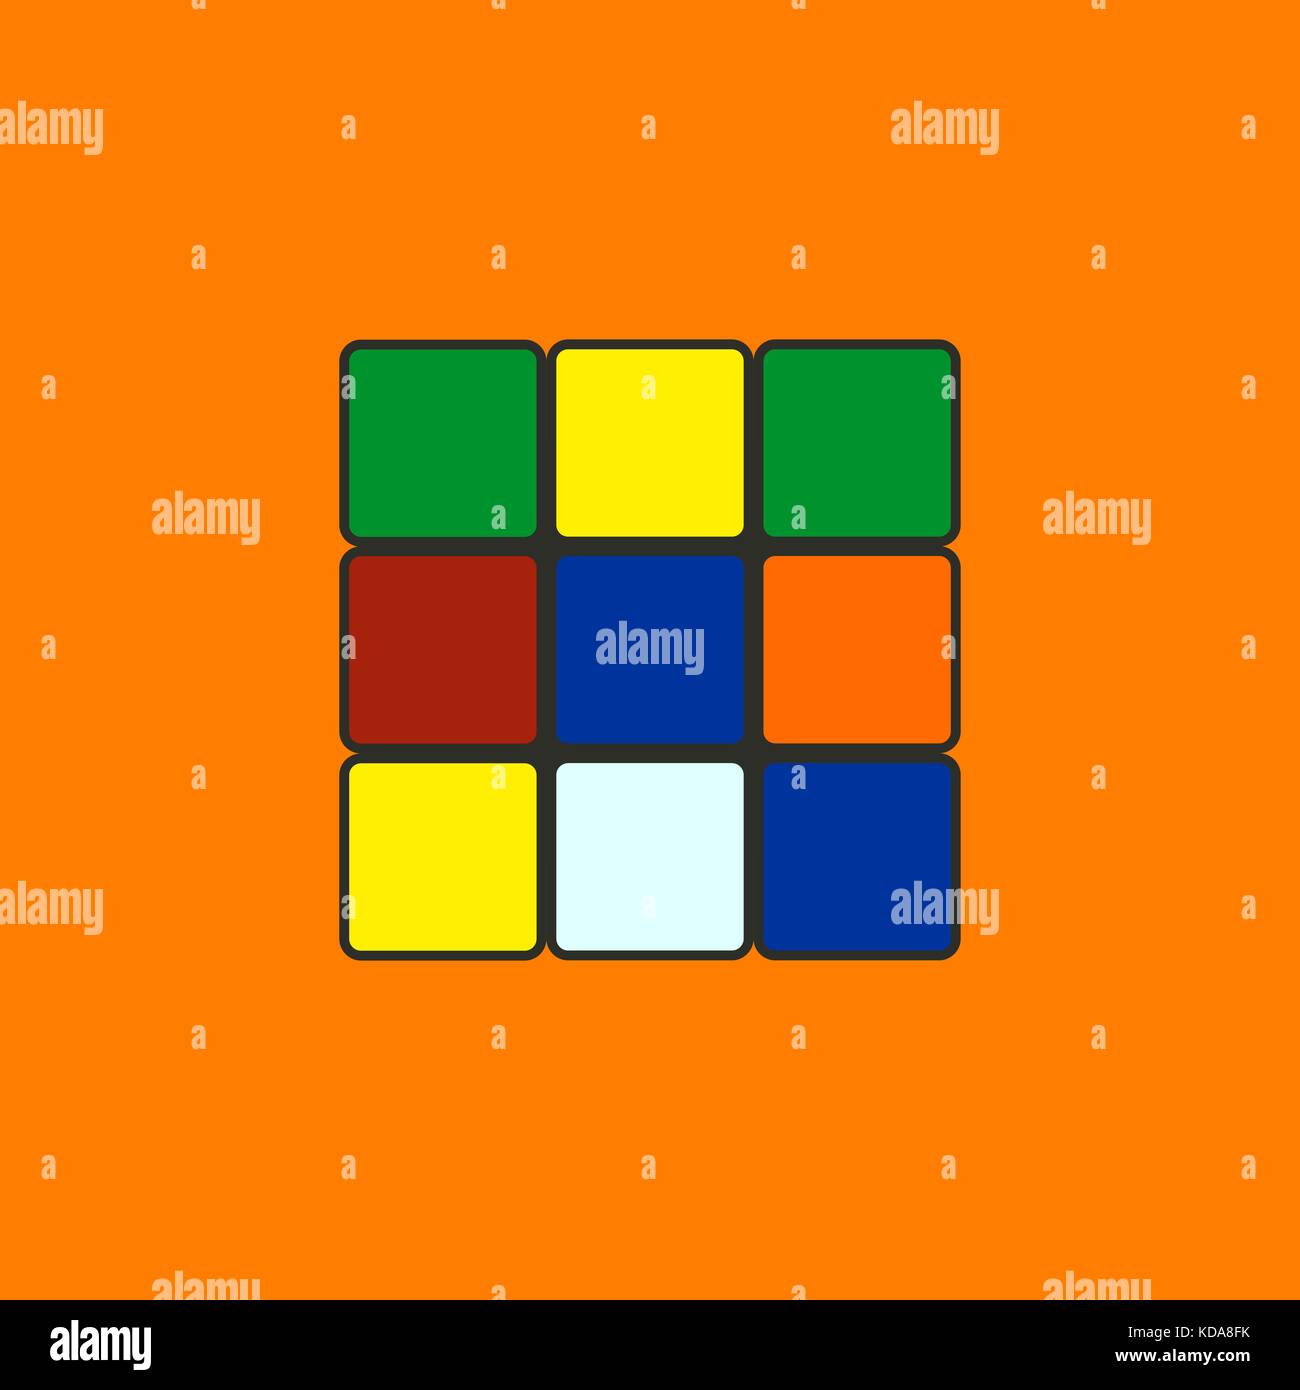 Game icon Rubik's cube isolated on a yellow background. Flat style, vector illustration. Stock Vector